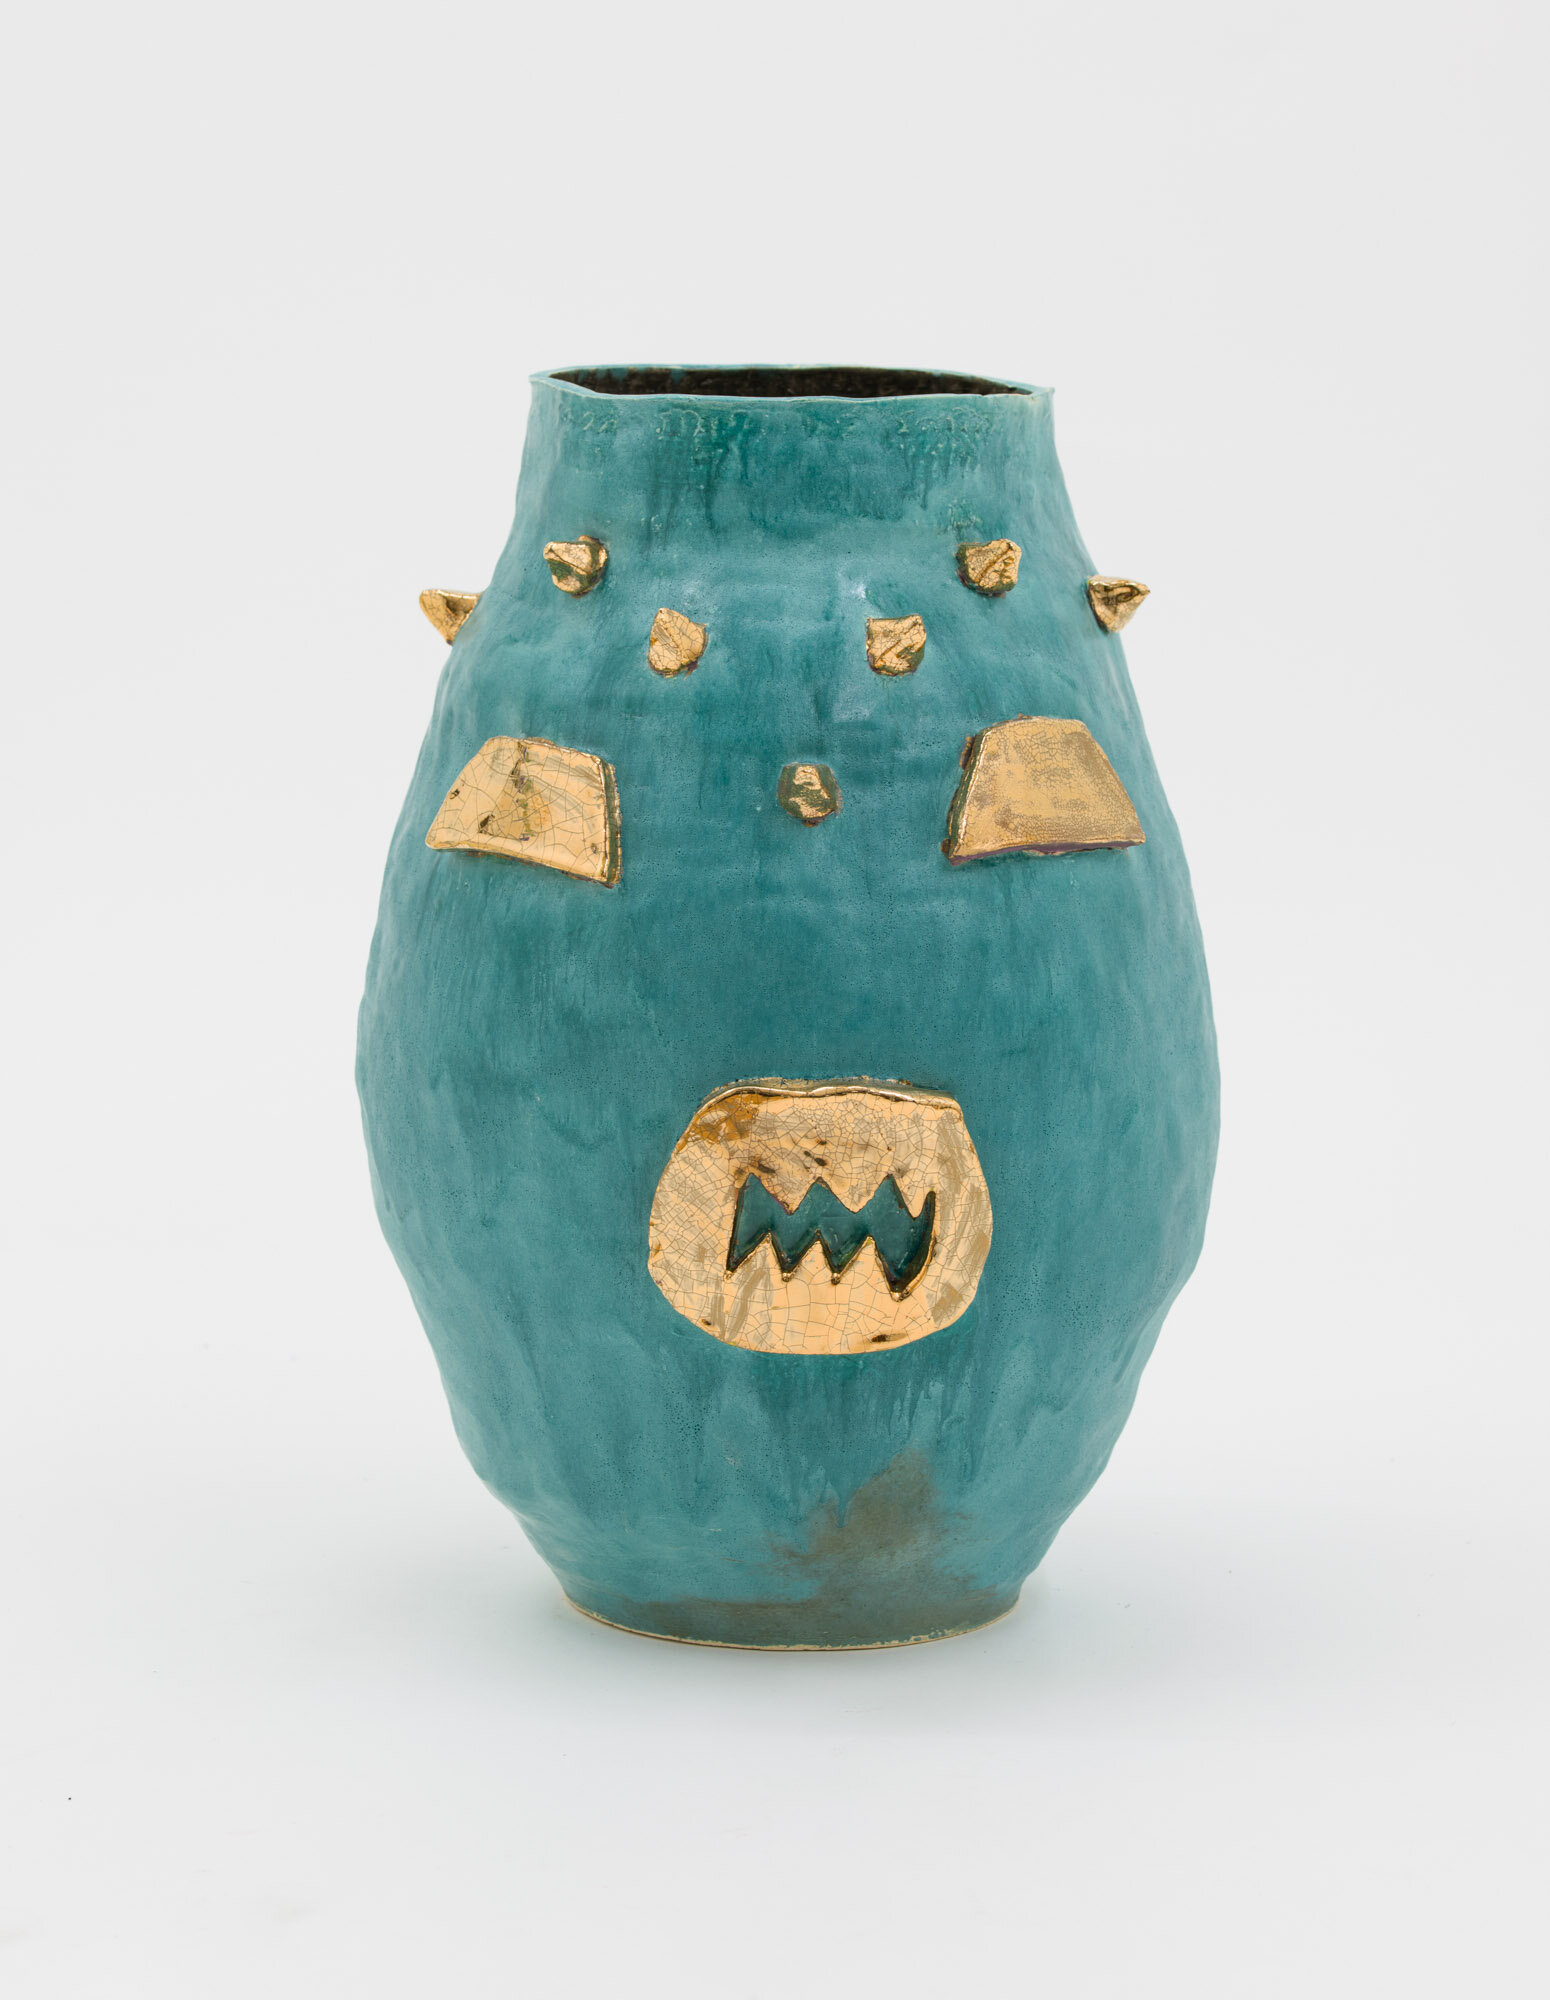   Grace , 2020, 21 1/2 x 13 1/2 x 11 1/2 inches, glazed stoneware with gold 